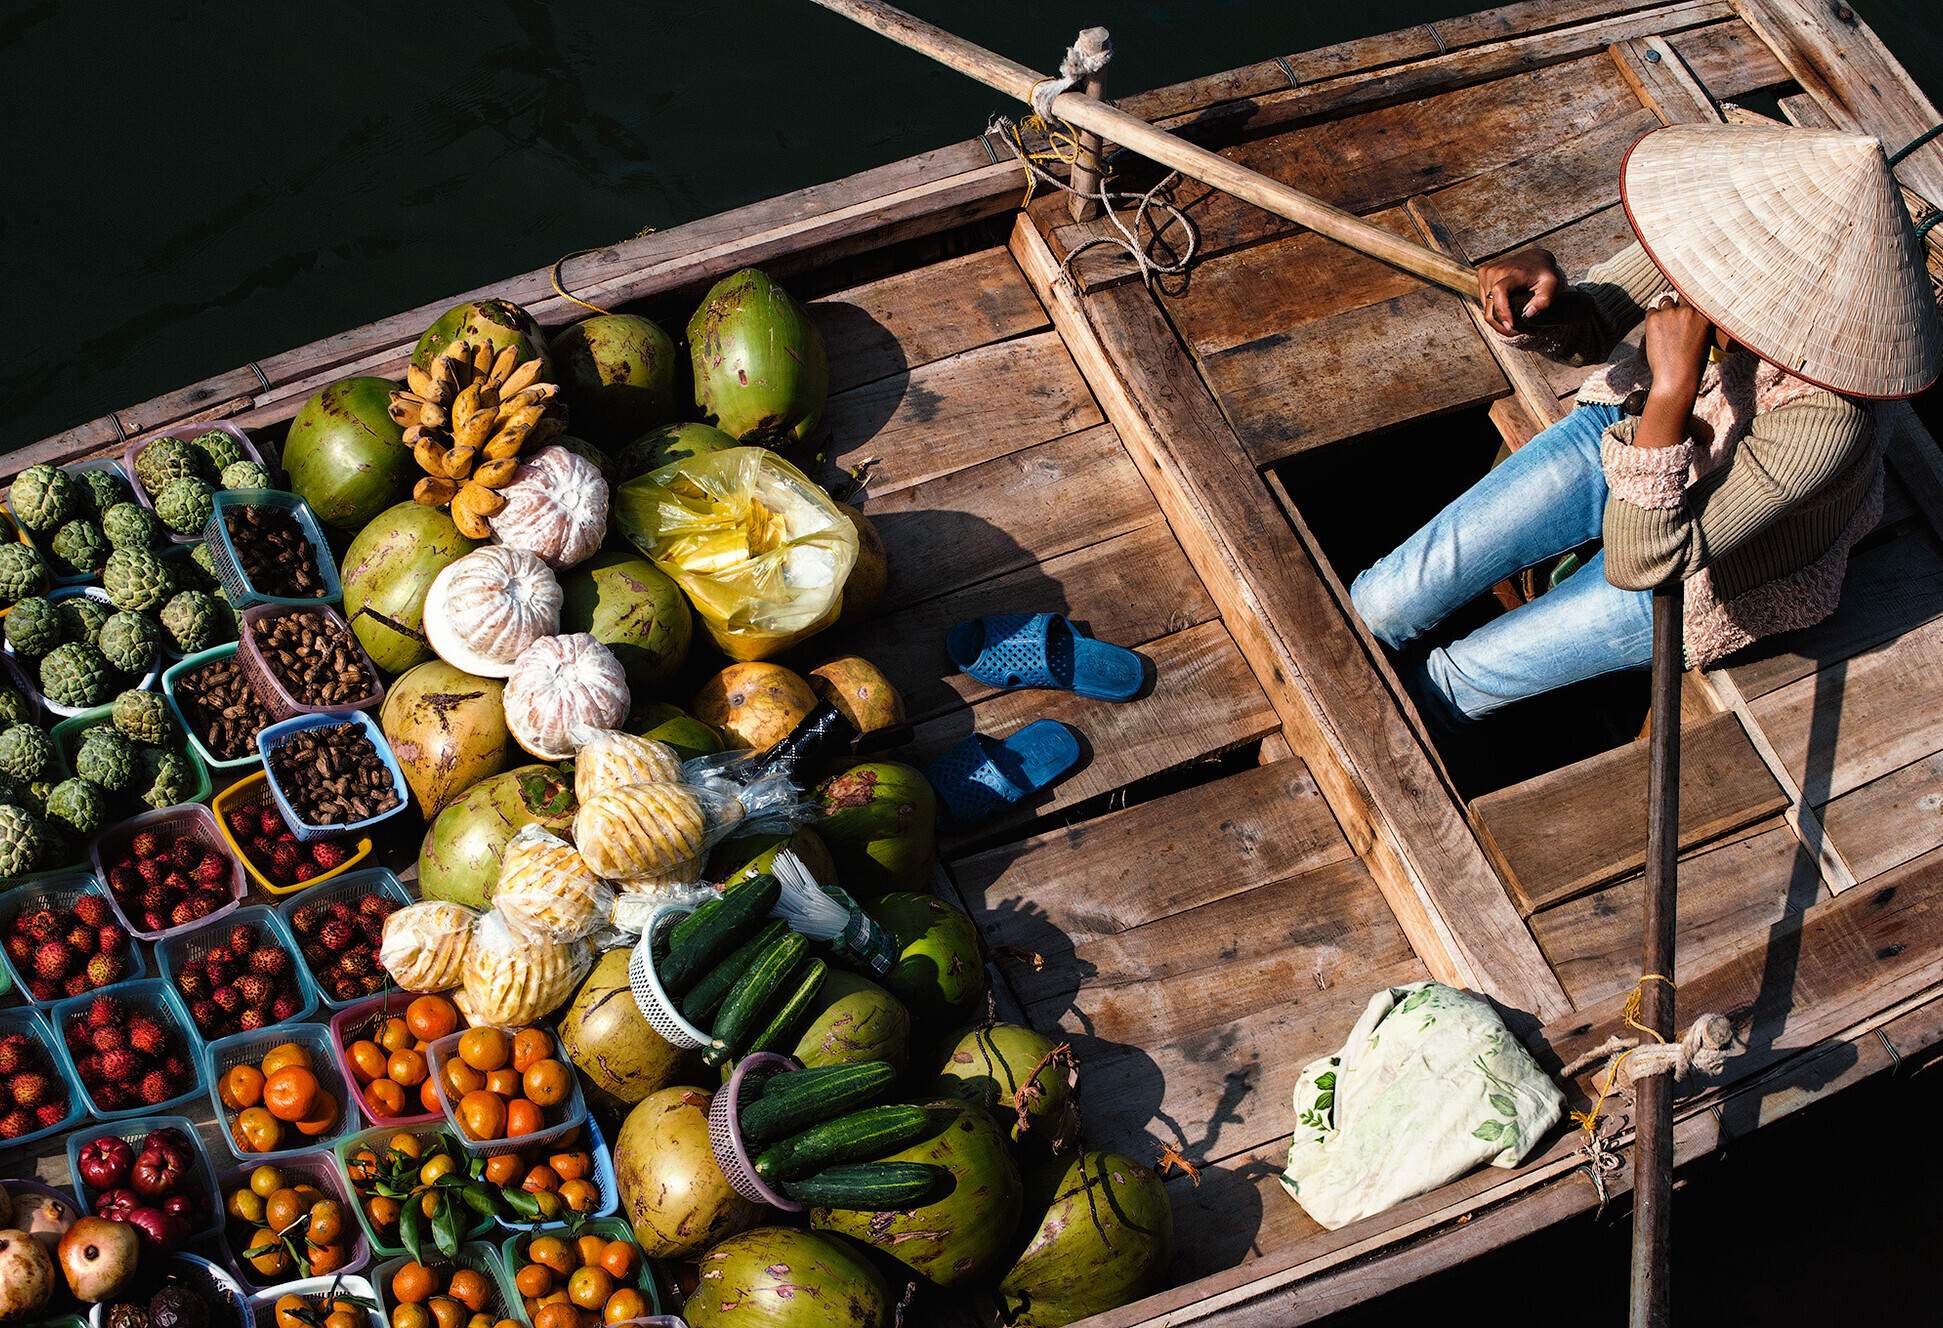 A lady fruit vendor sits on her wooden boat.